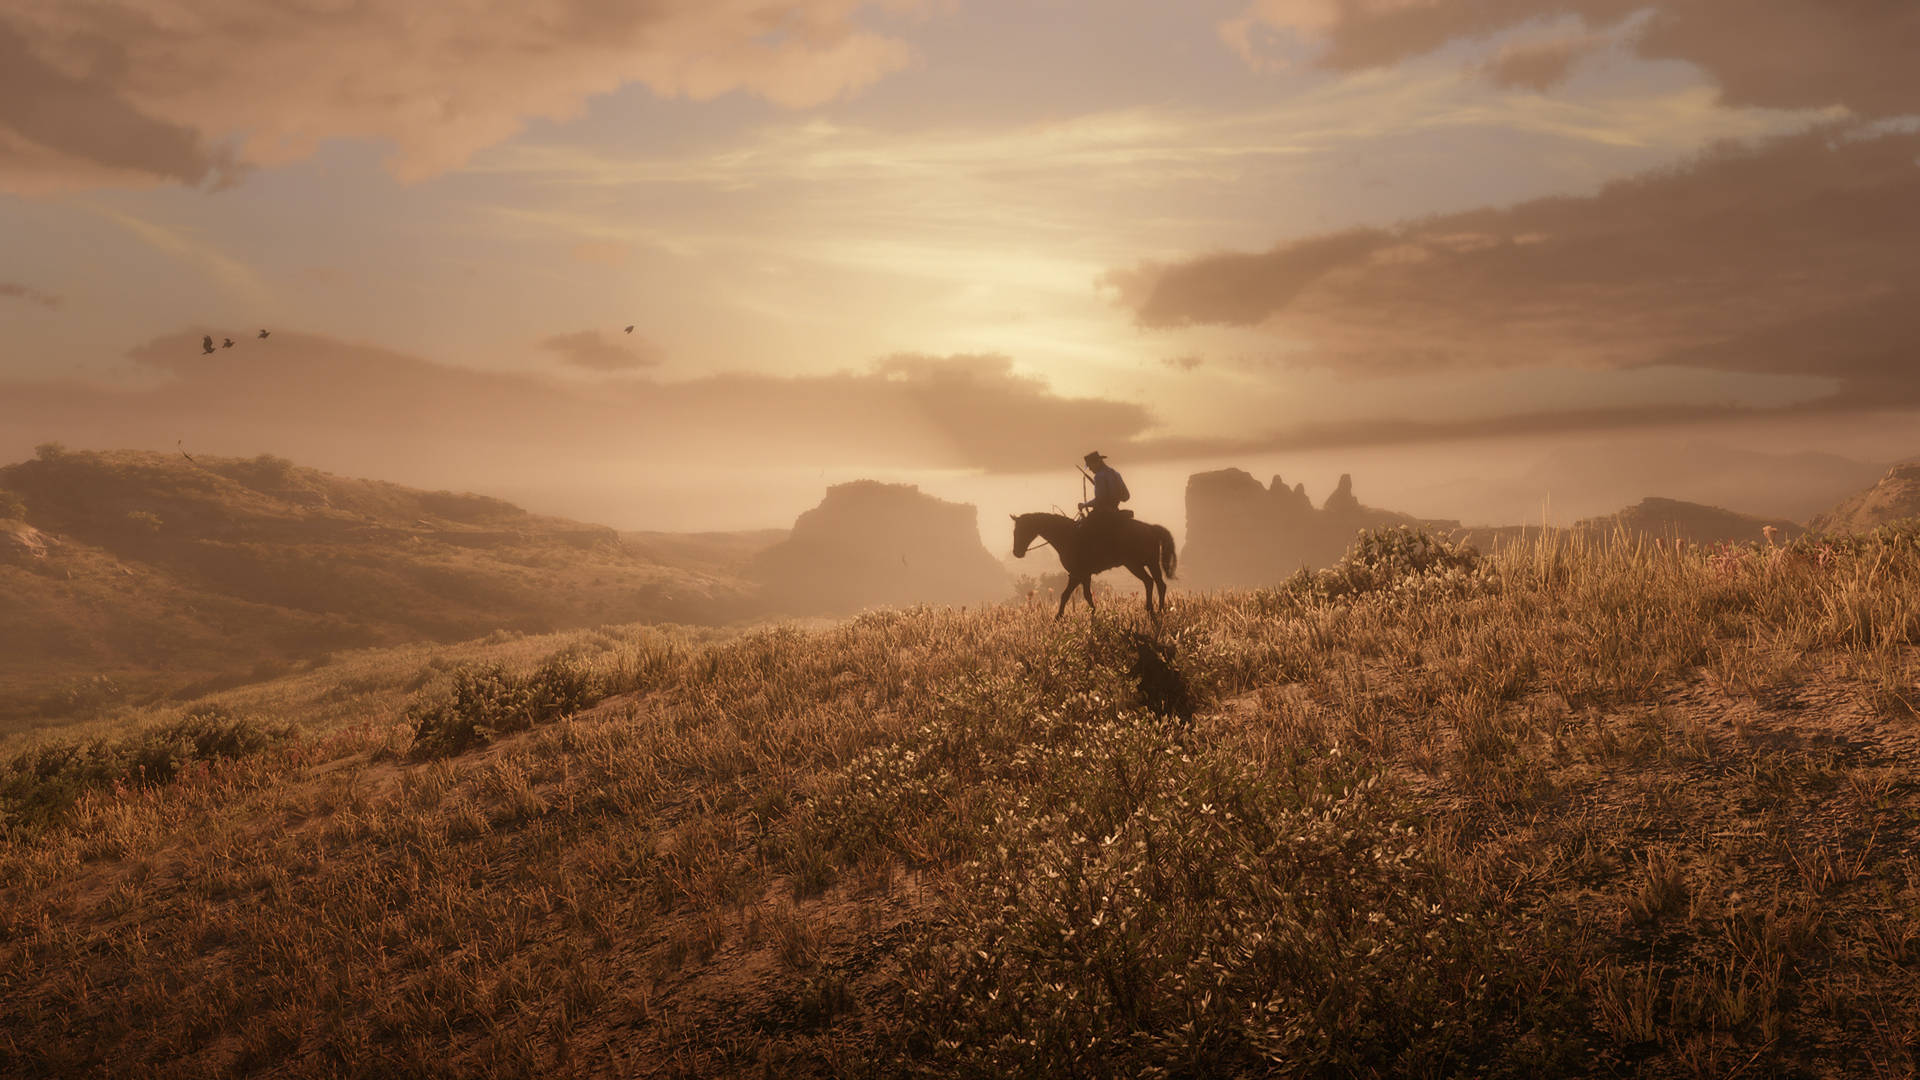 "Explore the Wild West in Red Dead Redemption 2" Wallpaper